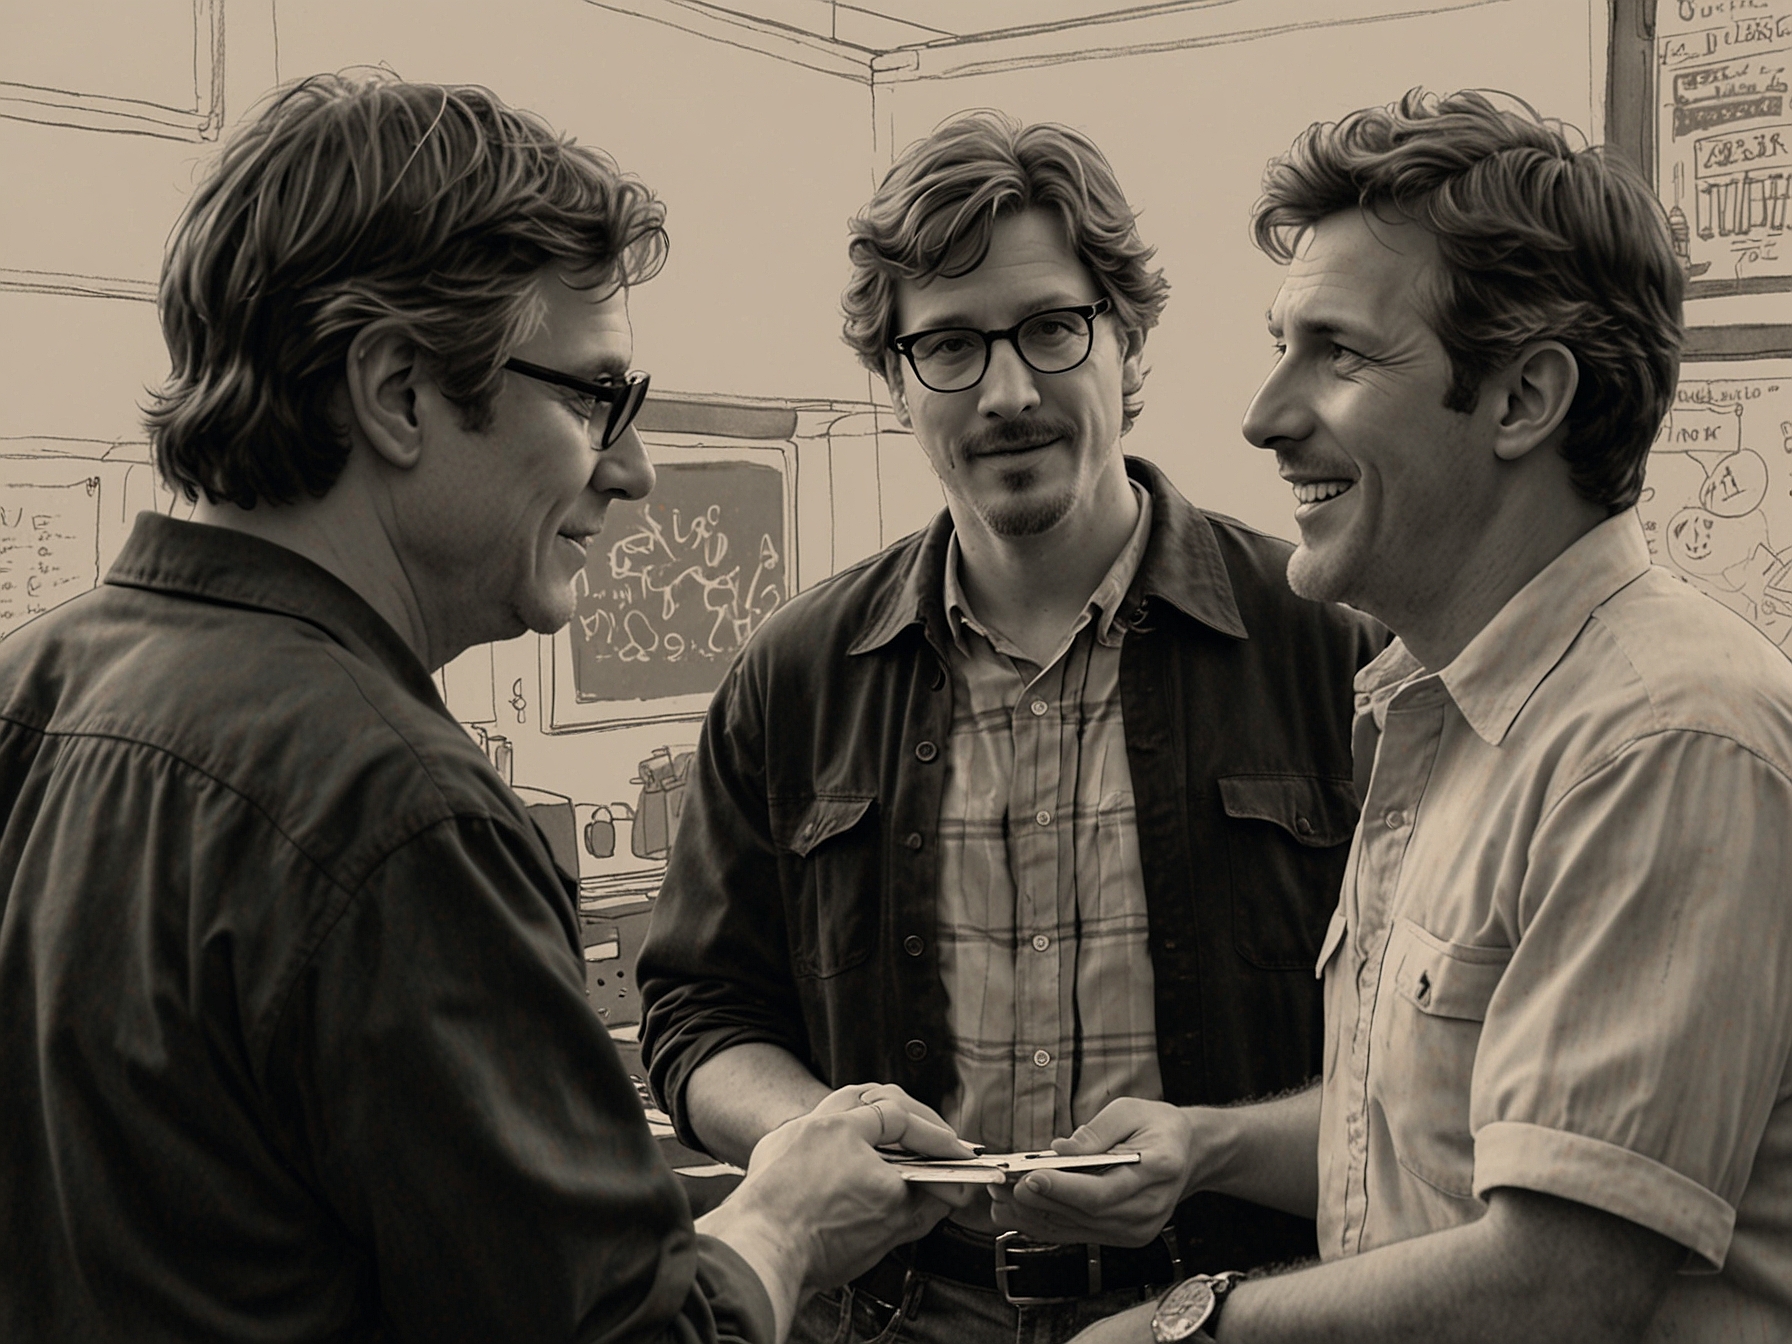 Director Peter Farrelly collaborates with screenwriters Paul Wernick and Rhett Reese on set, discussing a key scene. The image reflects the teamwork and creative process behind bringing 'Balls Up' to life.